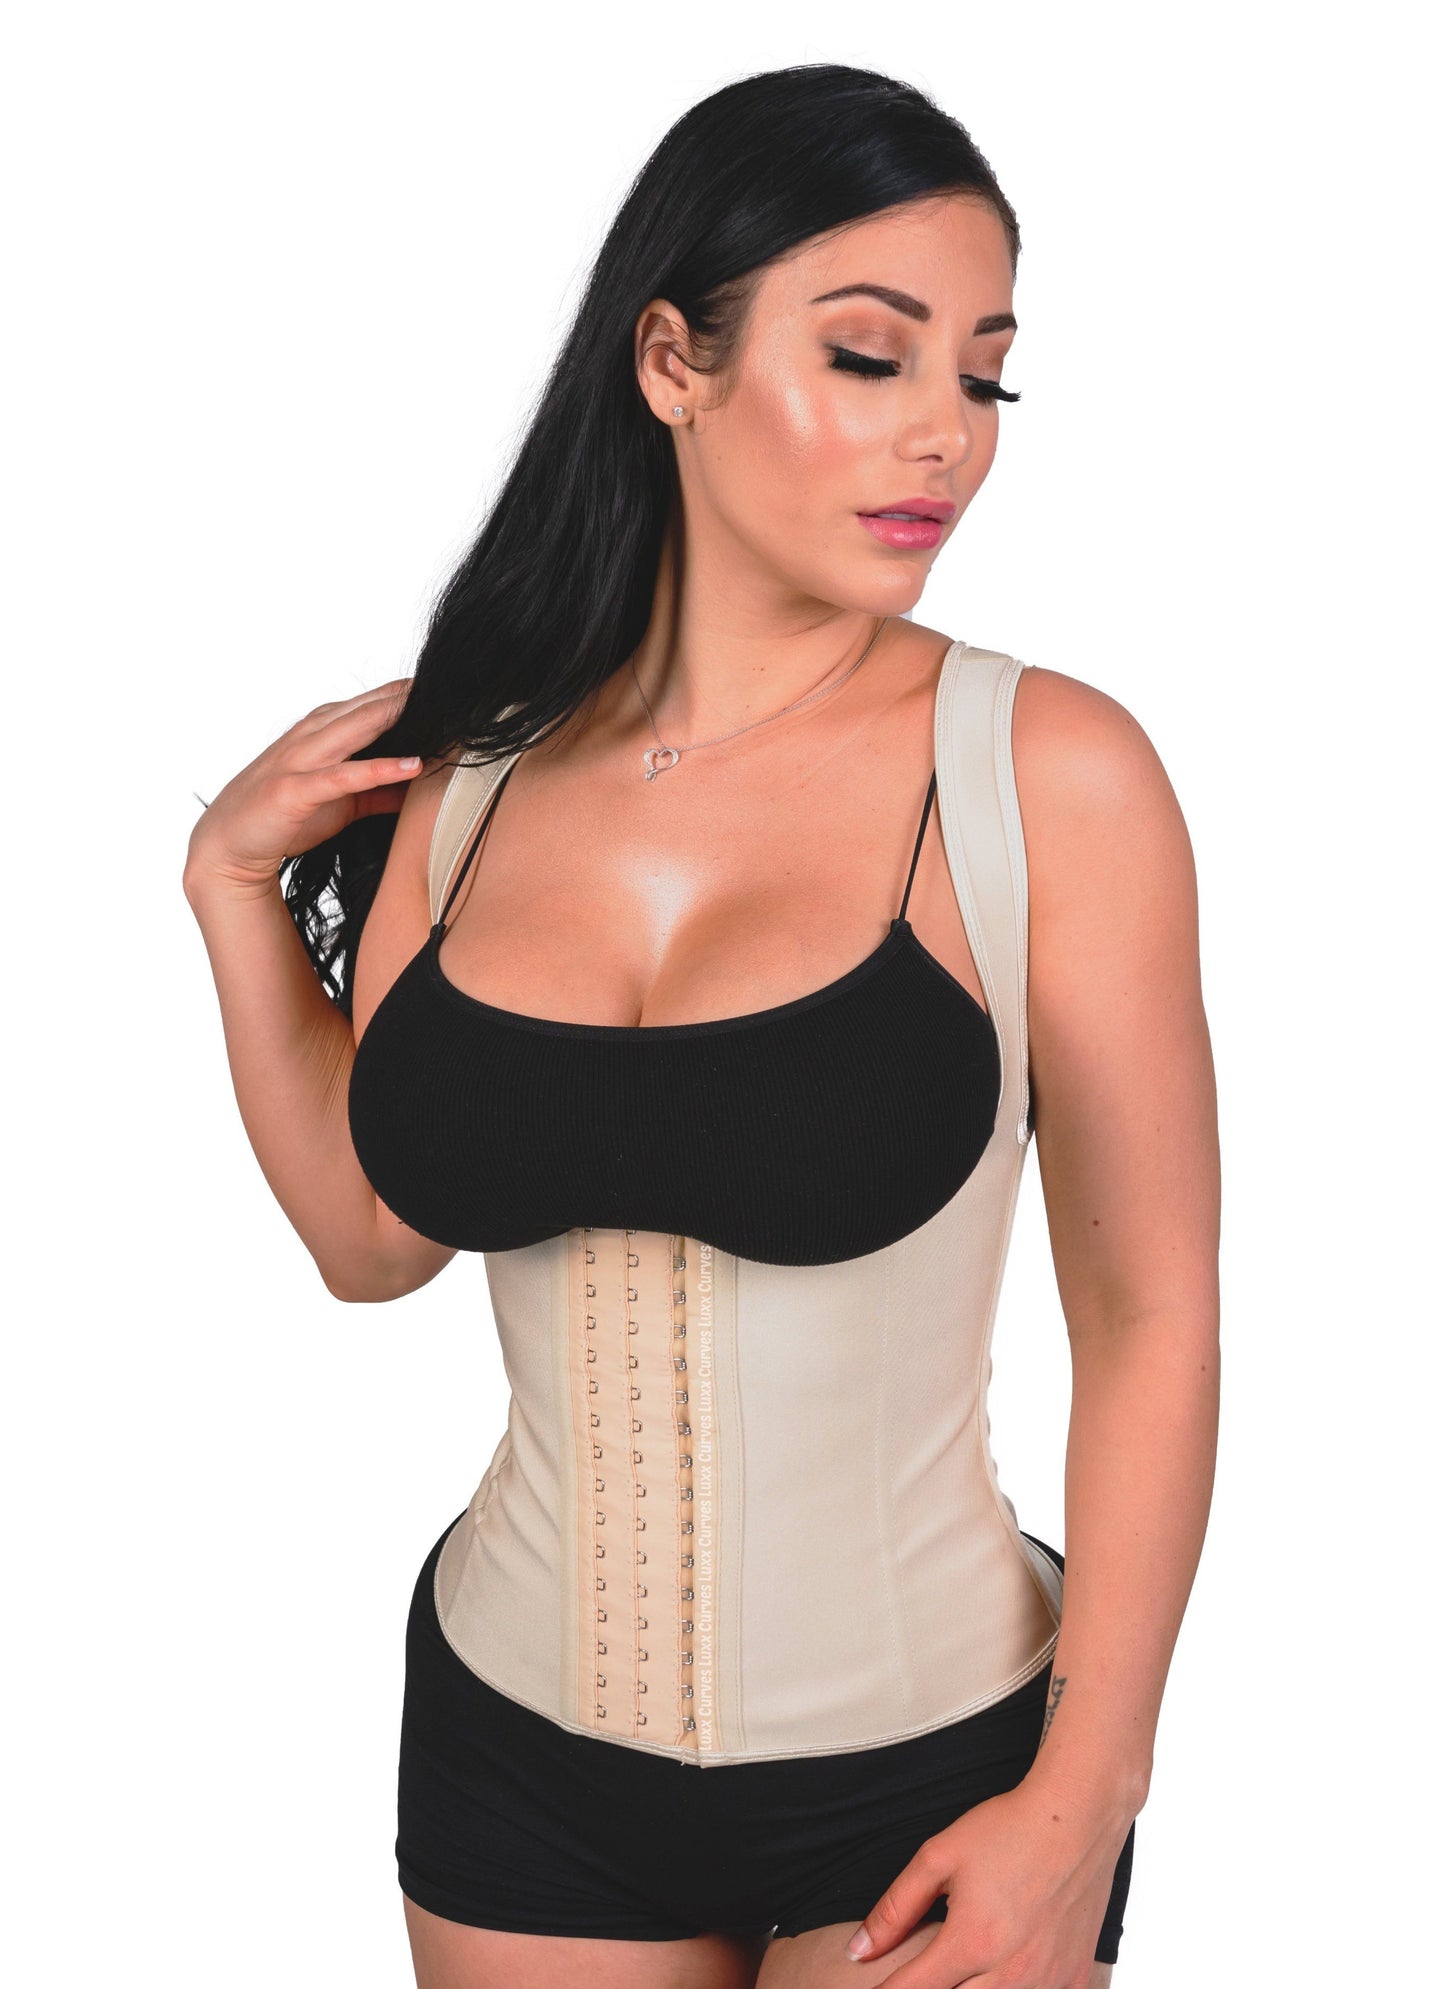 Waist Trainers for sale in Brampton, Ontario